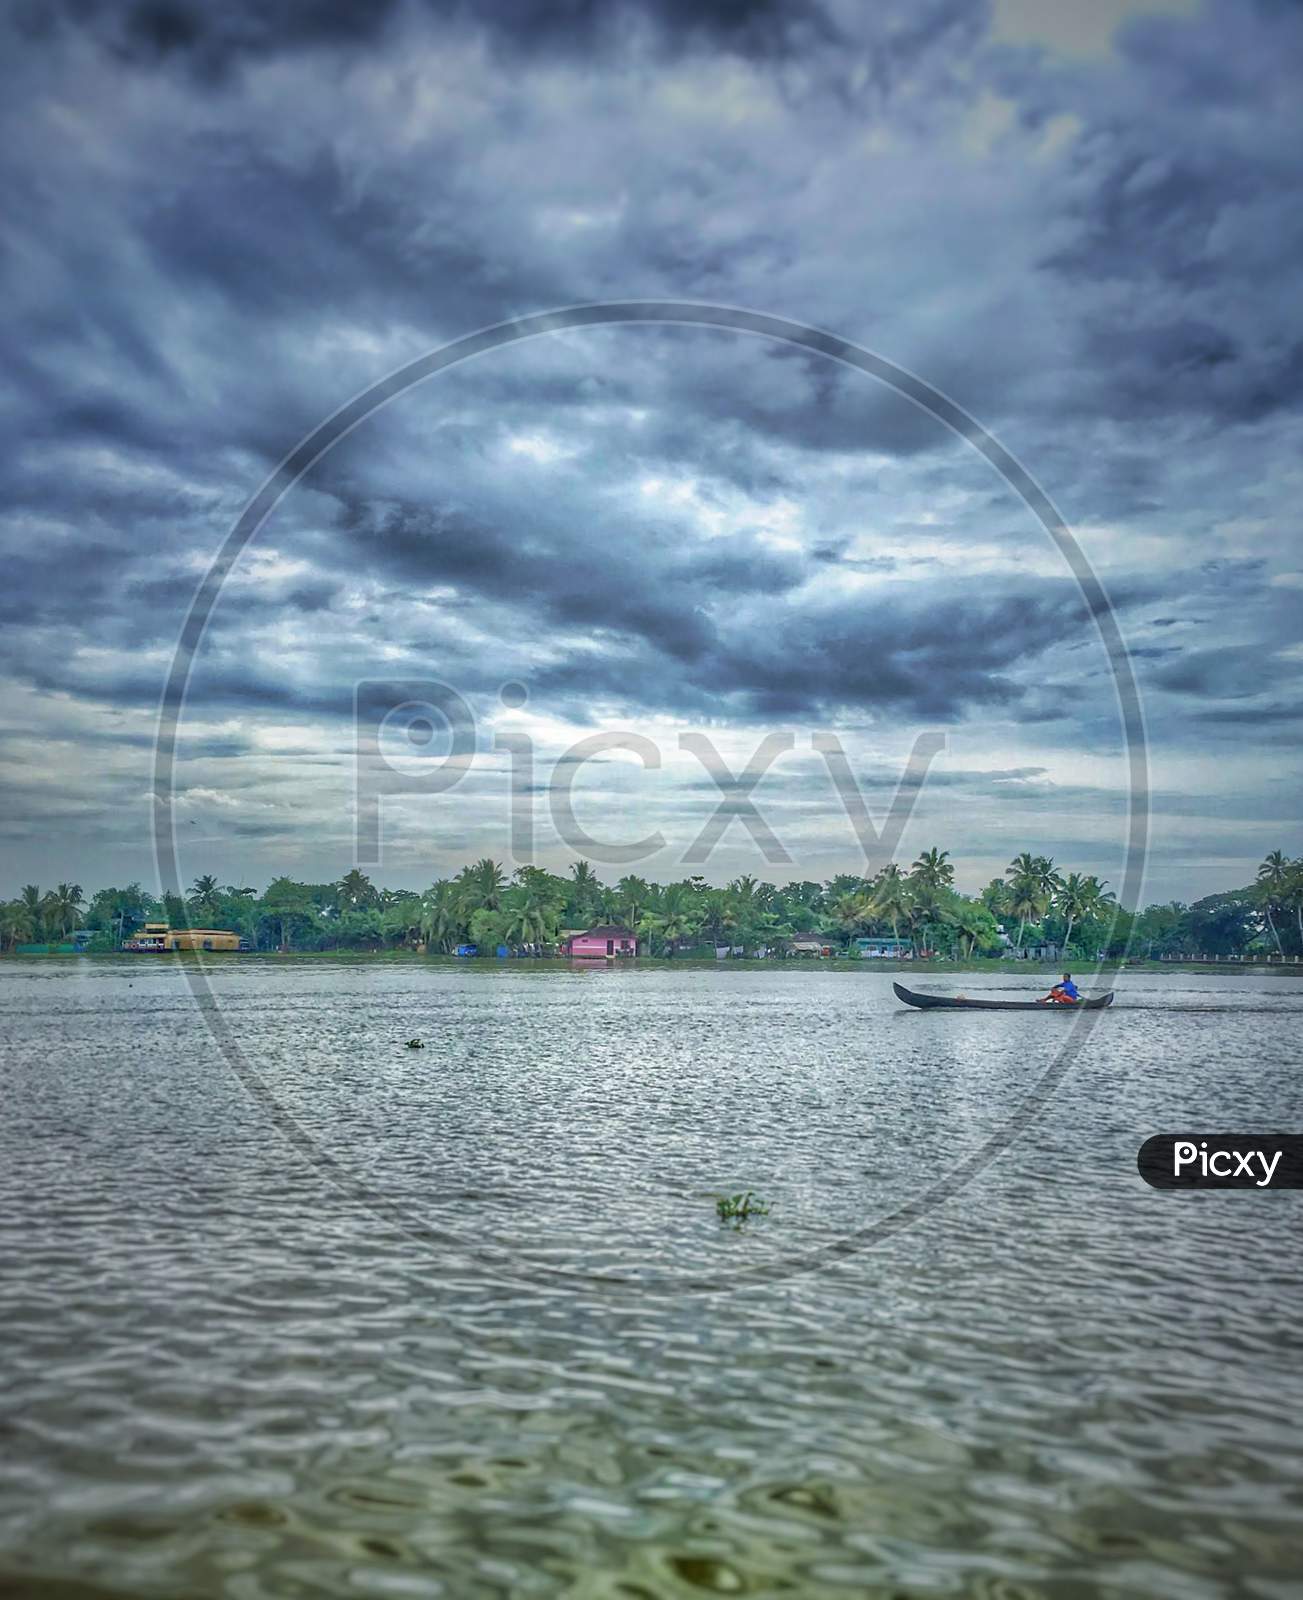 Rowing over backwaters - Allepey ❤️ #shotoniphone .